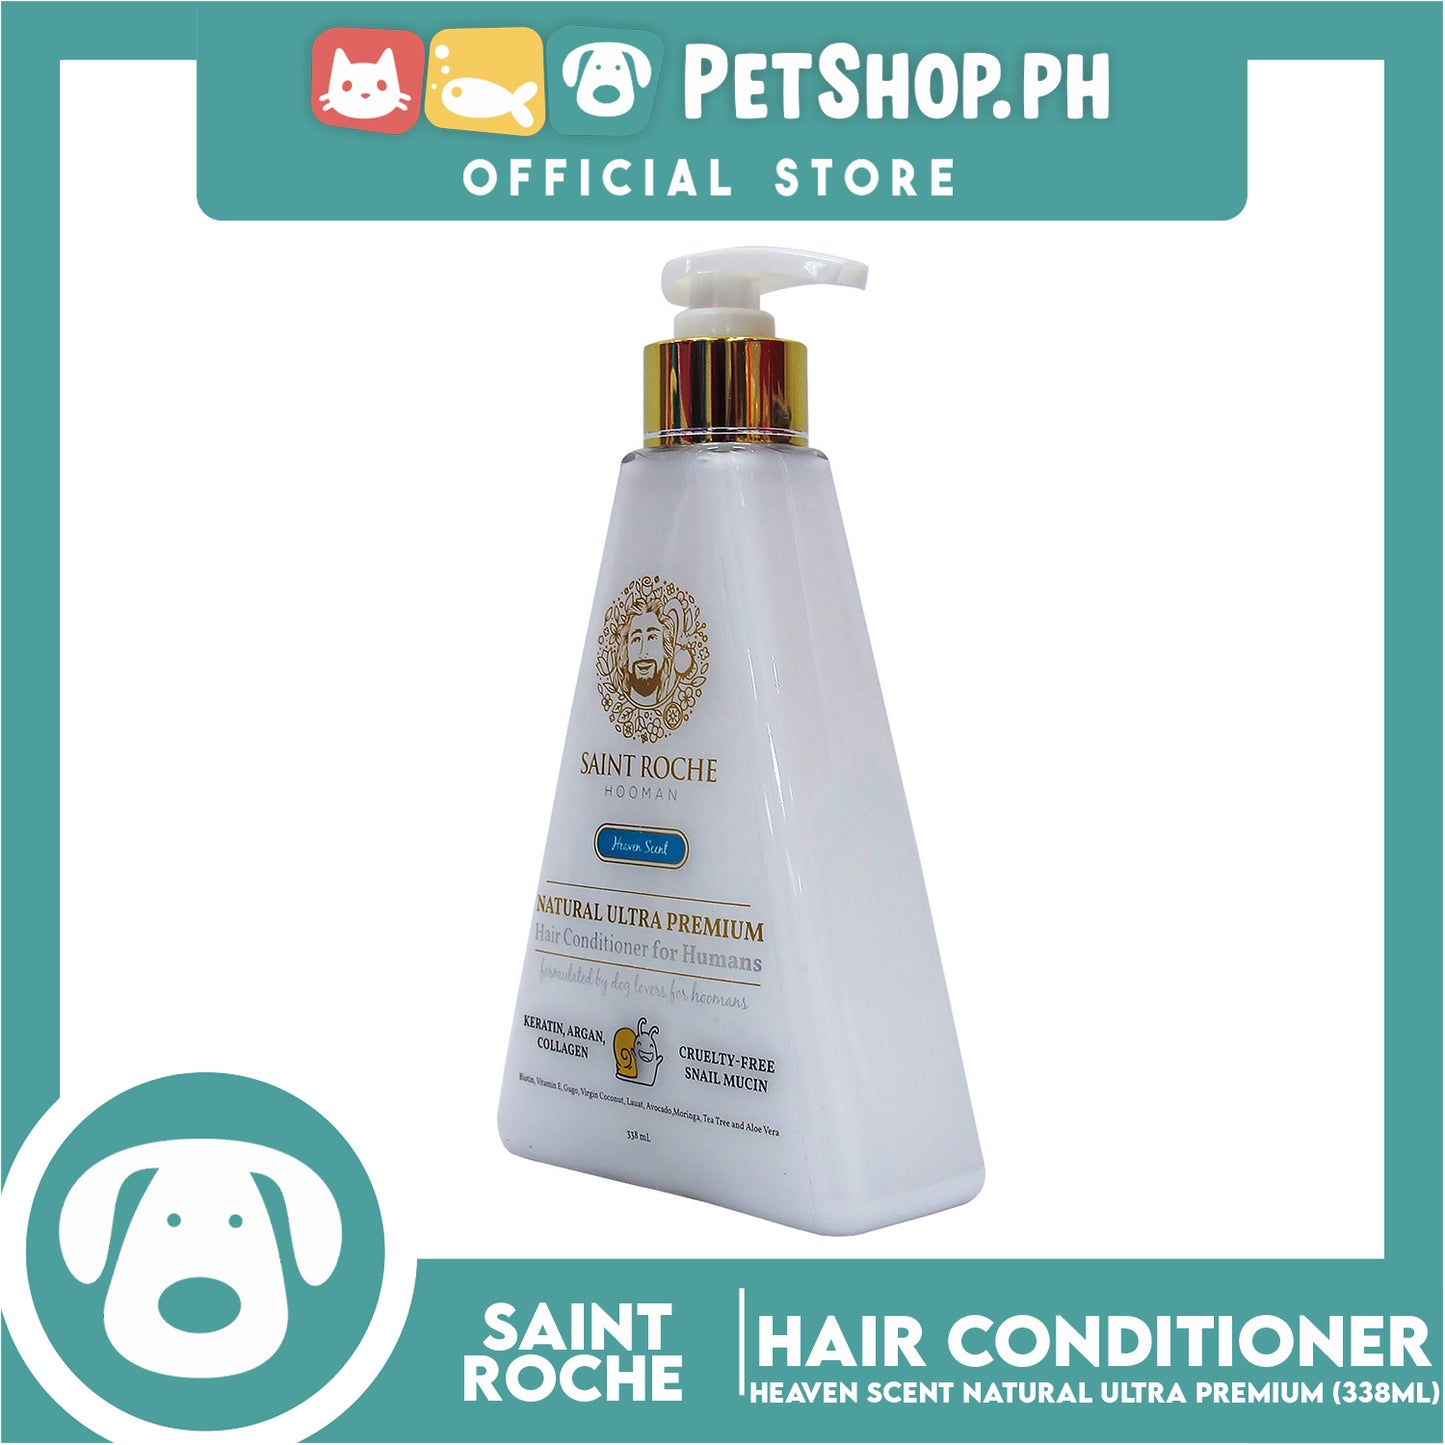 Saint Roche Hooman Natural Ultra Premium Conditioner (Heaven Scent) 338ml For The Skin and Coat of Your Dogs